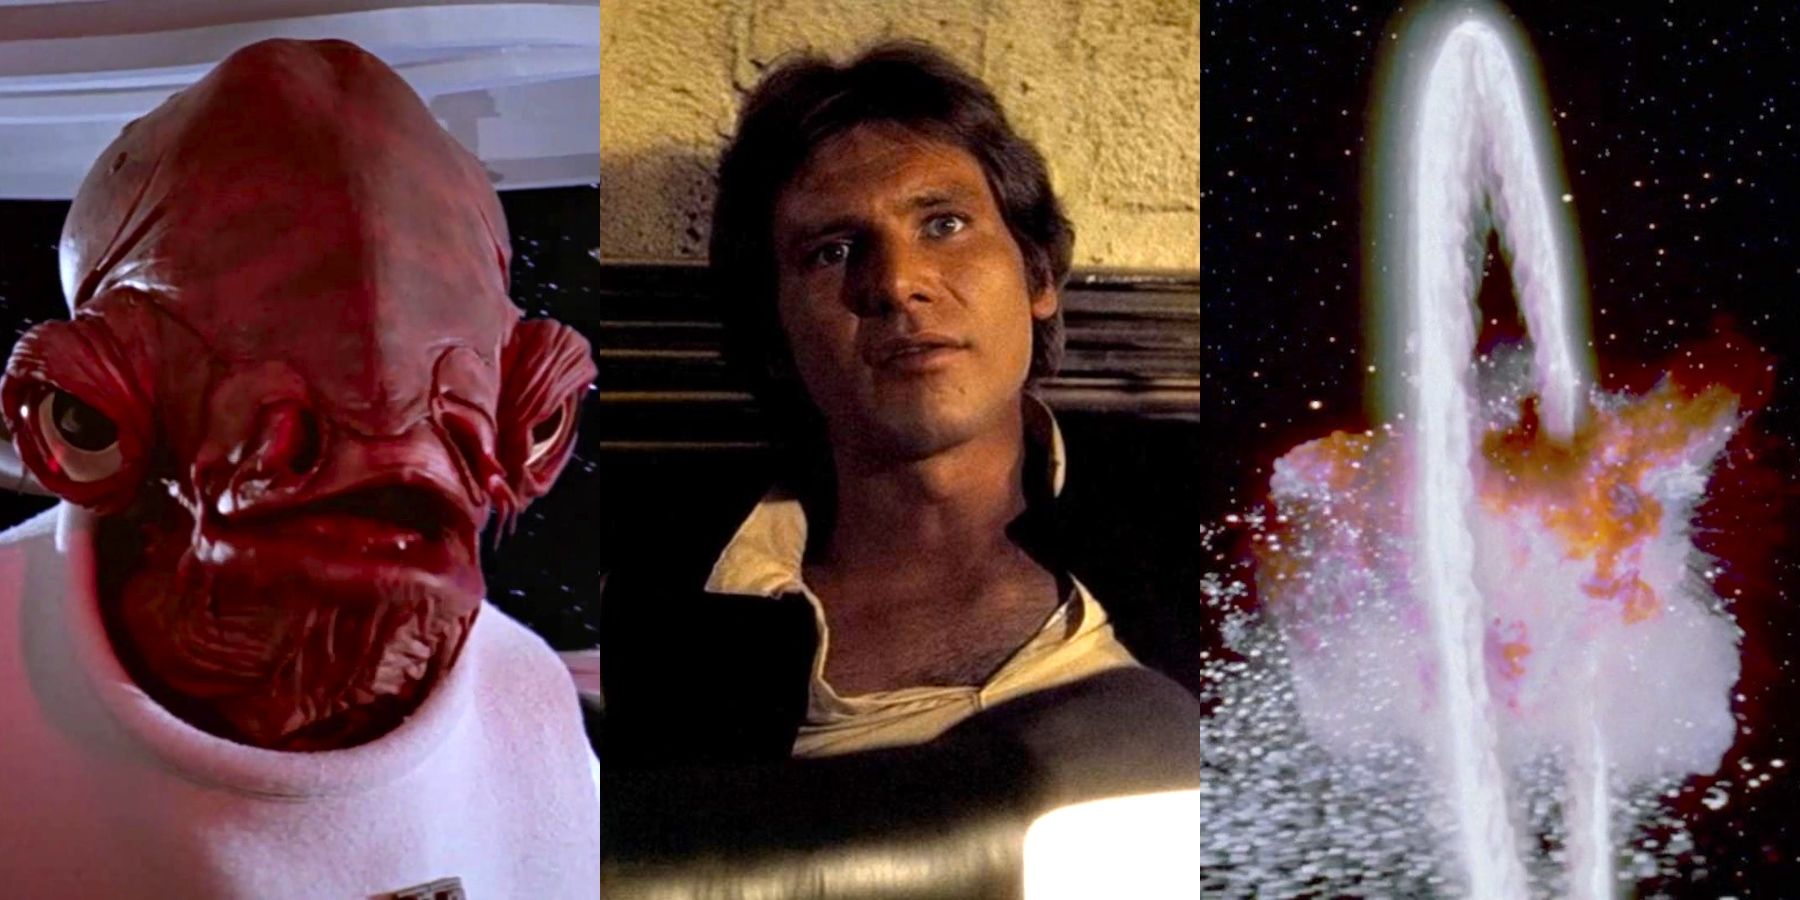 Admiral Ackbar, Harrison Ford as Han Solo, and the Special Edition Death Star explosion from the Star Wars movies